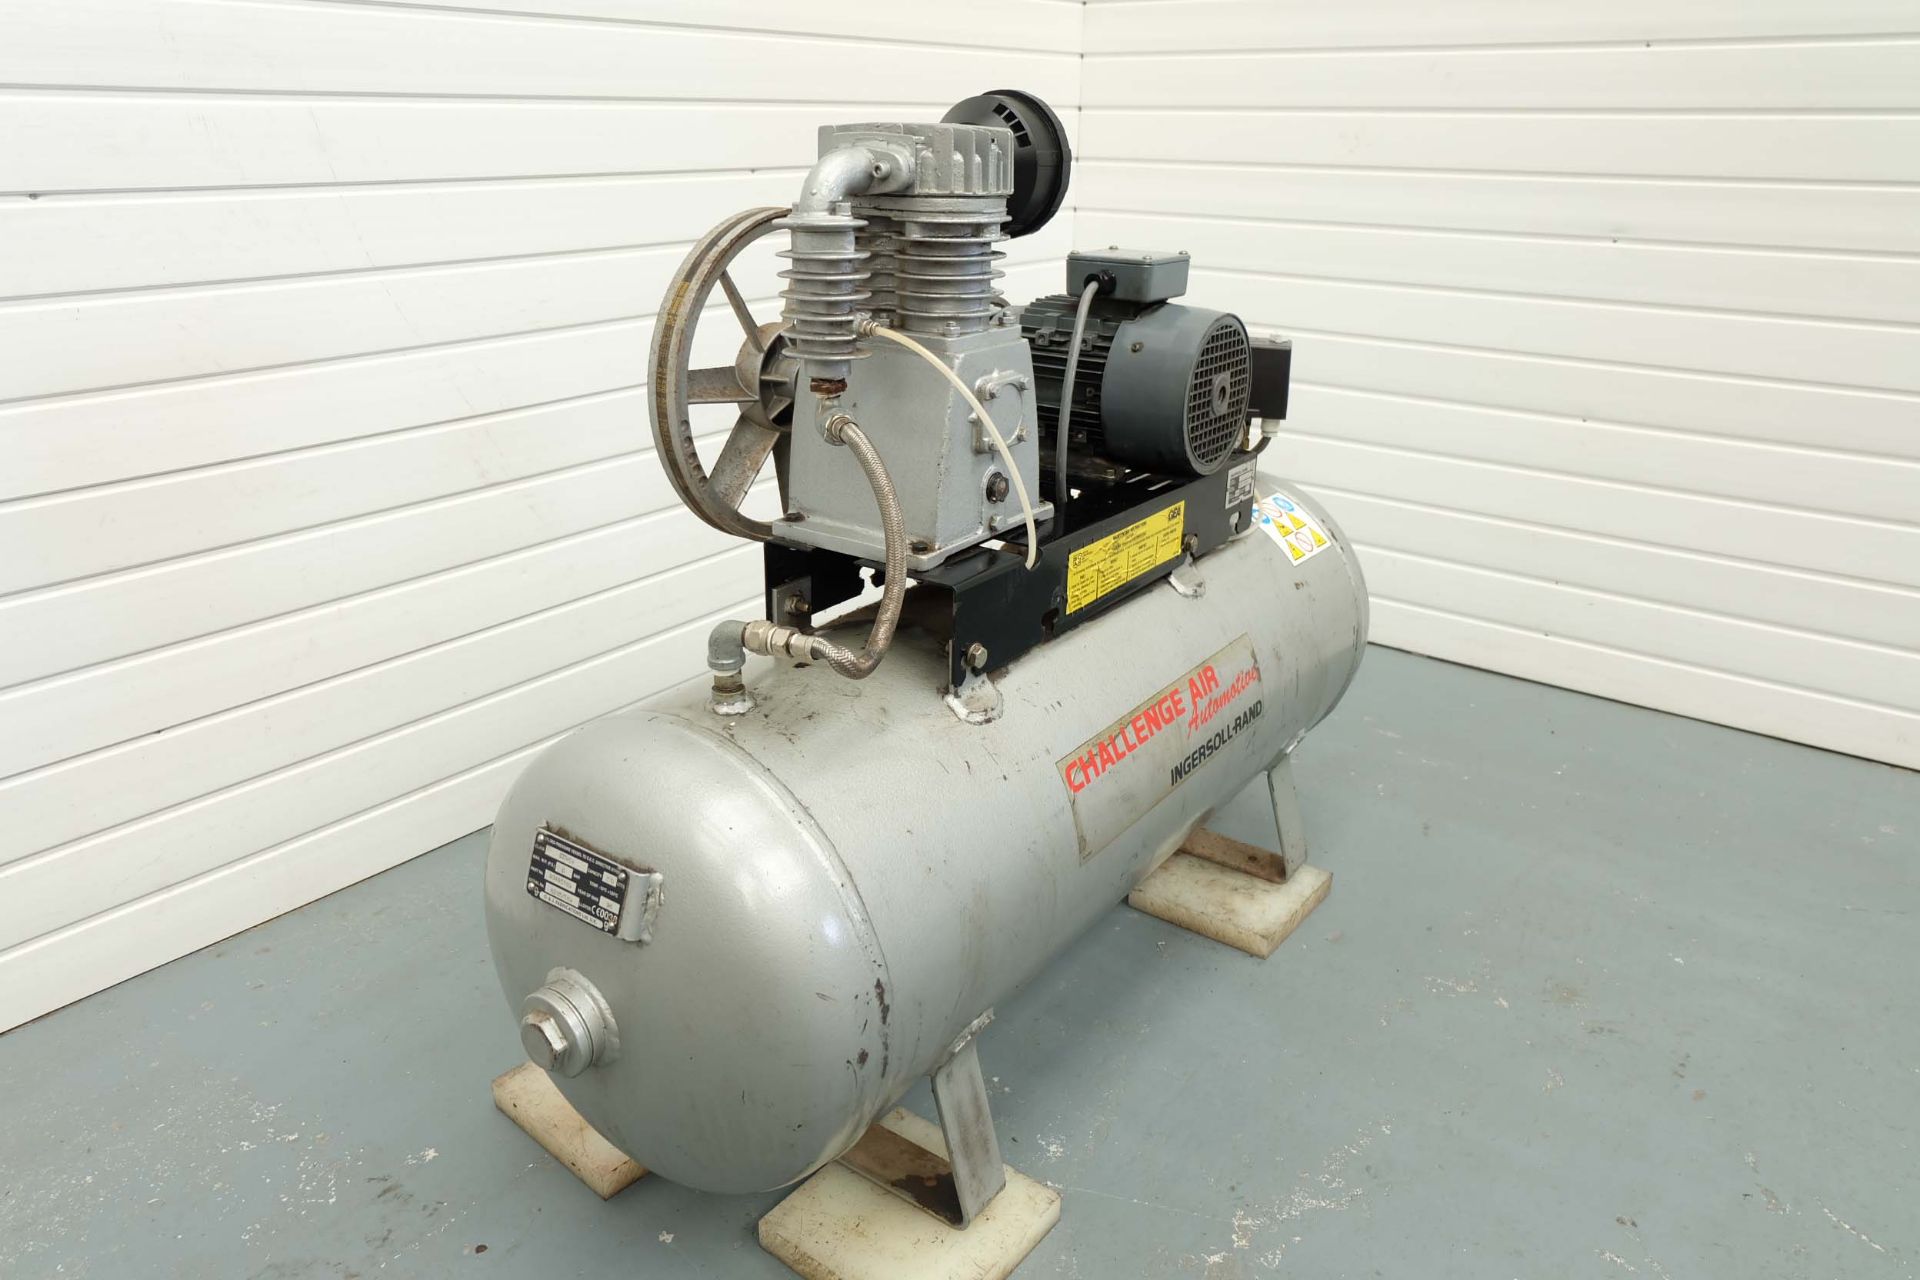 Ingersoll-Rand Model A3 Air Compressor. Power: 2.2 KW. 3 Phase. Max Pressure: 10 Bar. - Image 2 of 6